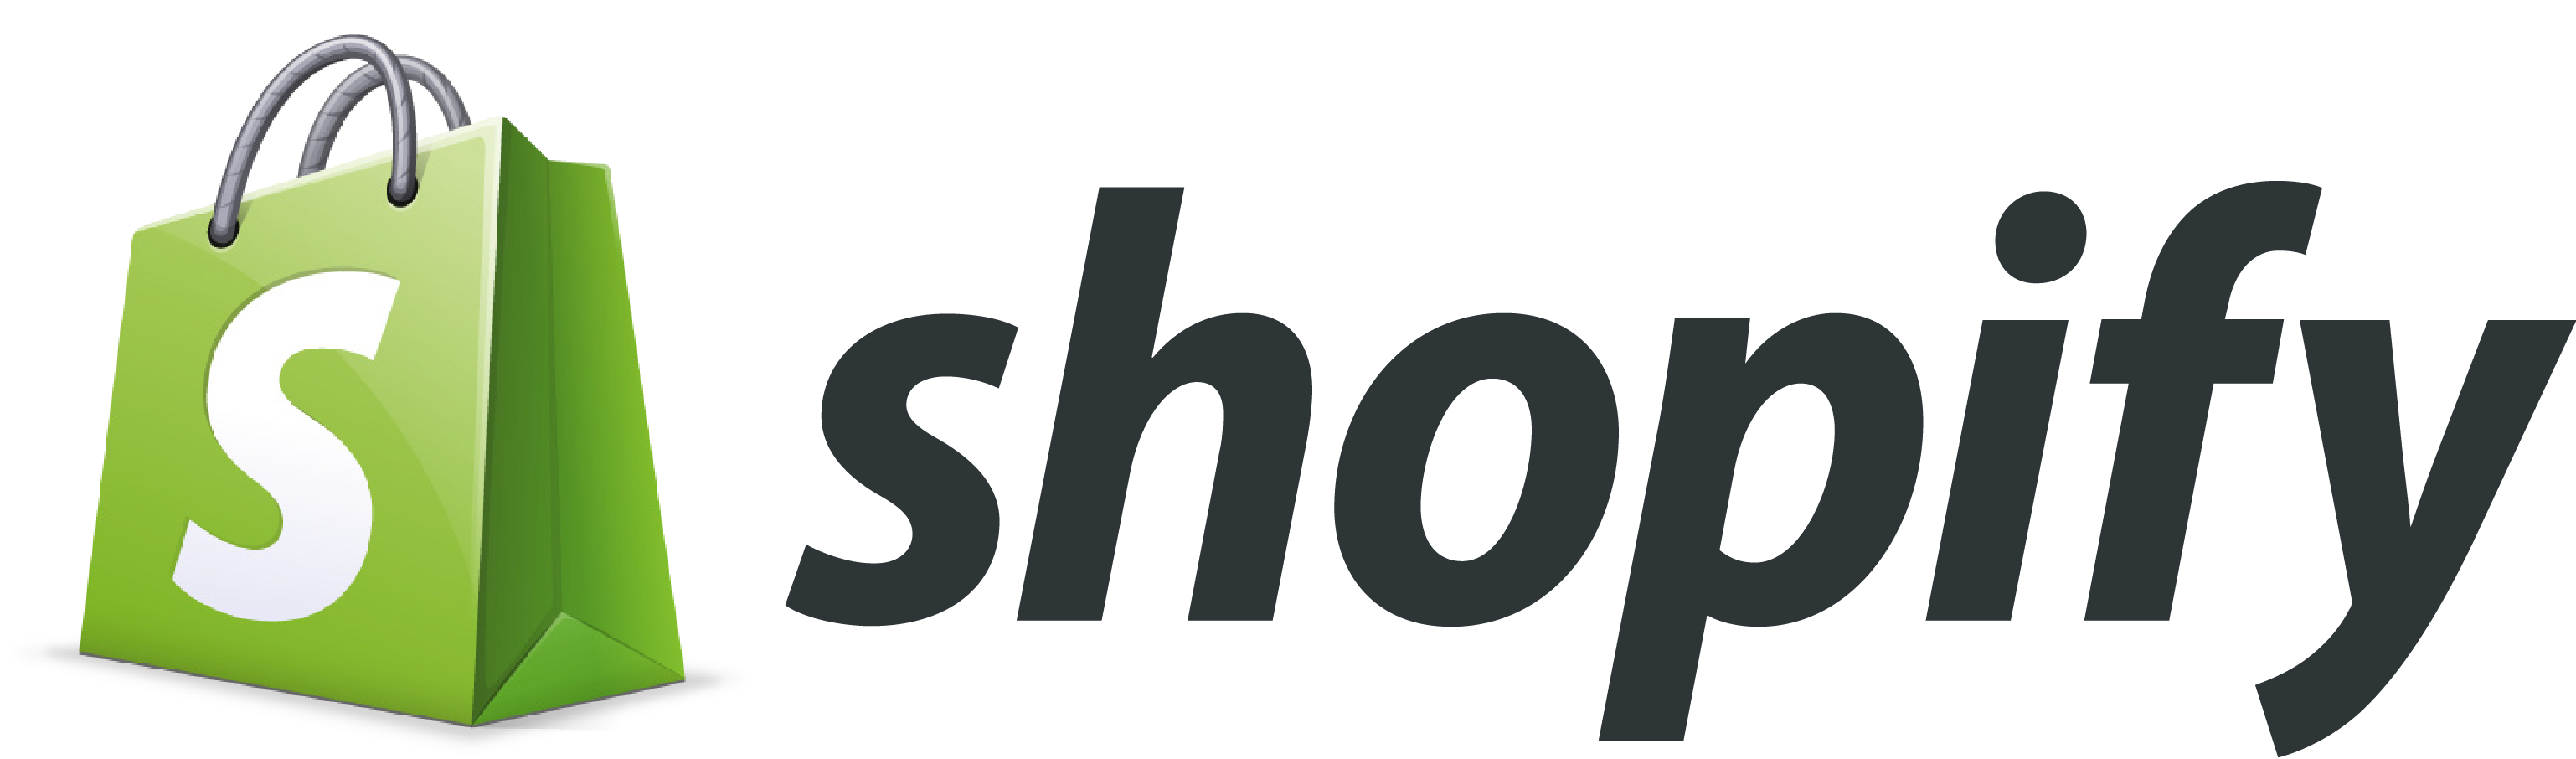 Shopify is a popular e-commerce platform with an affiliate marketing program